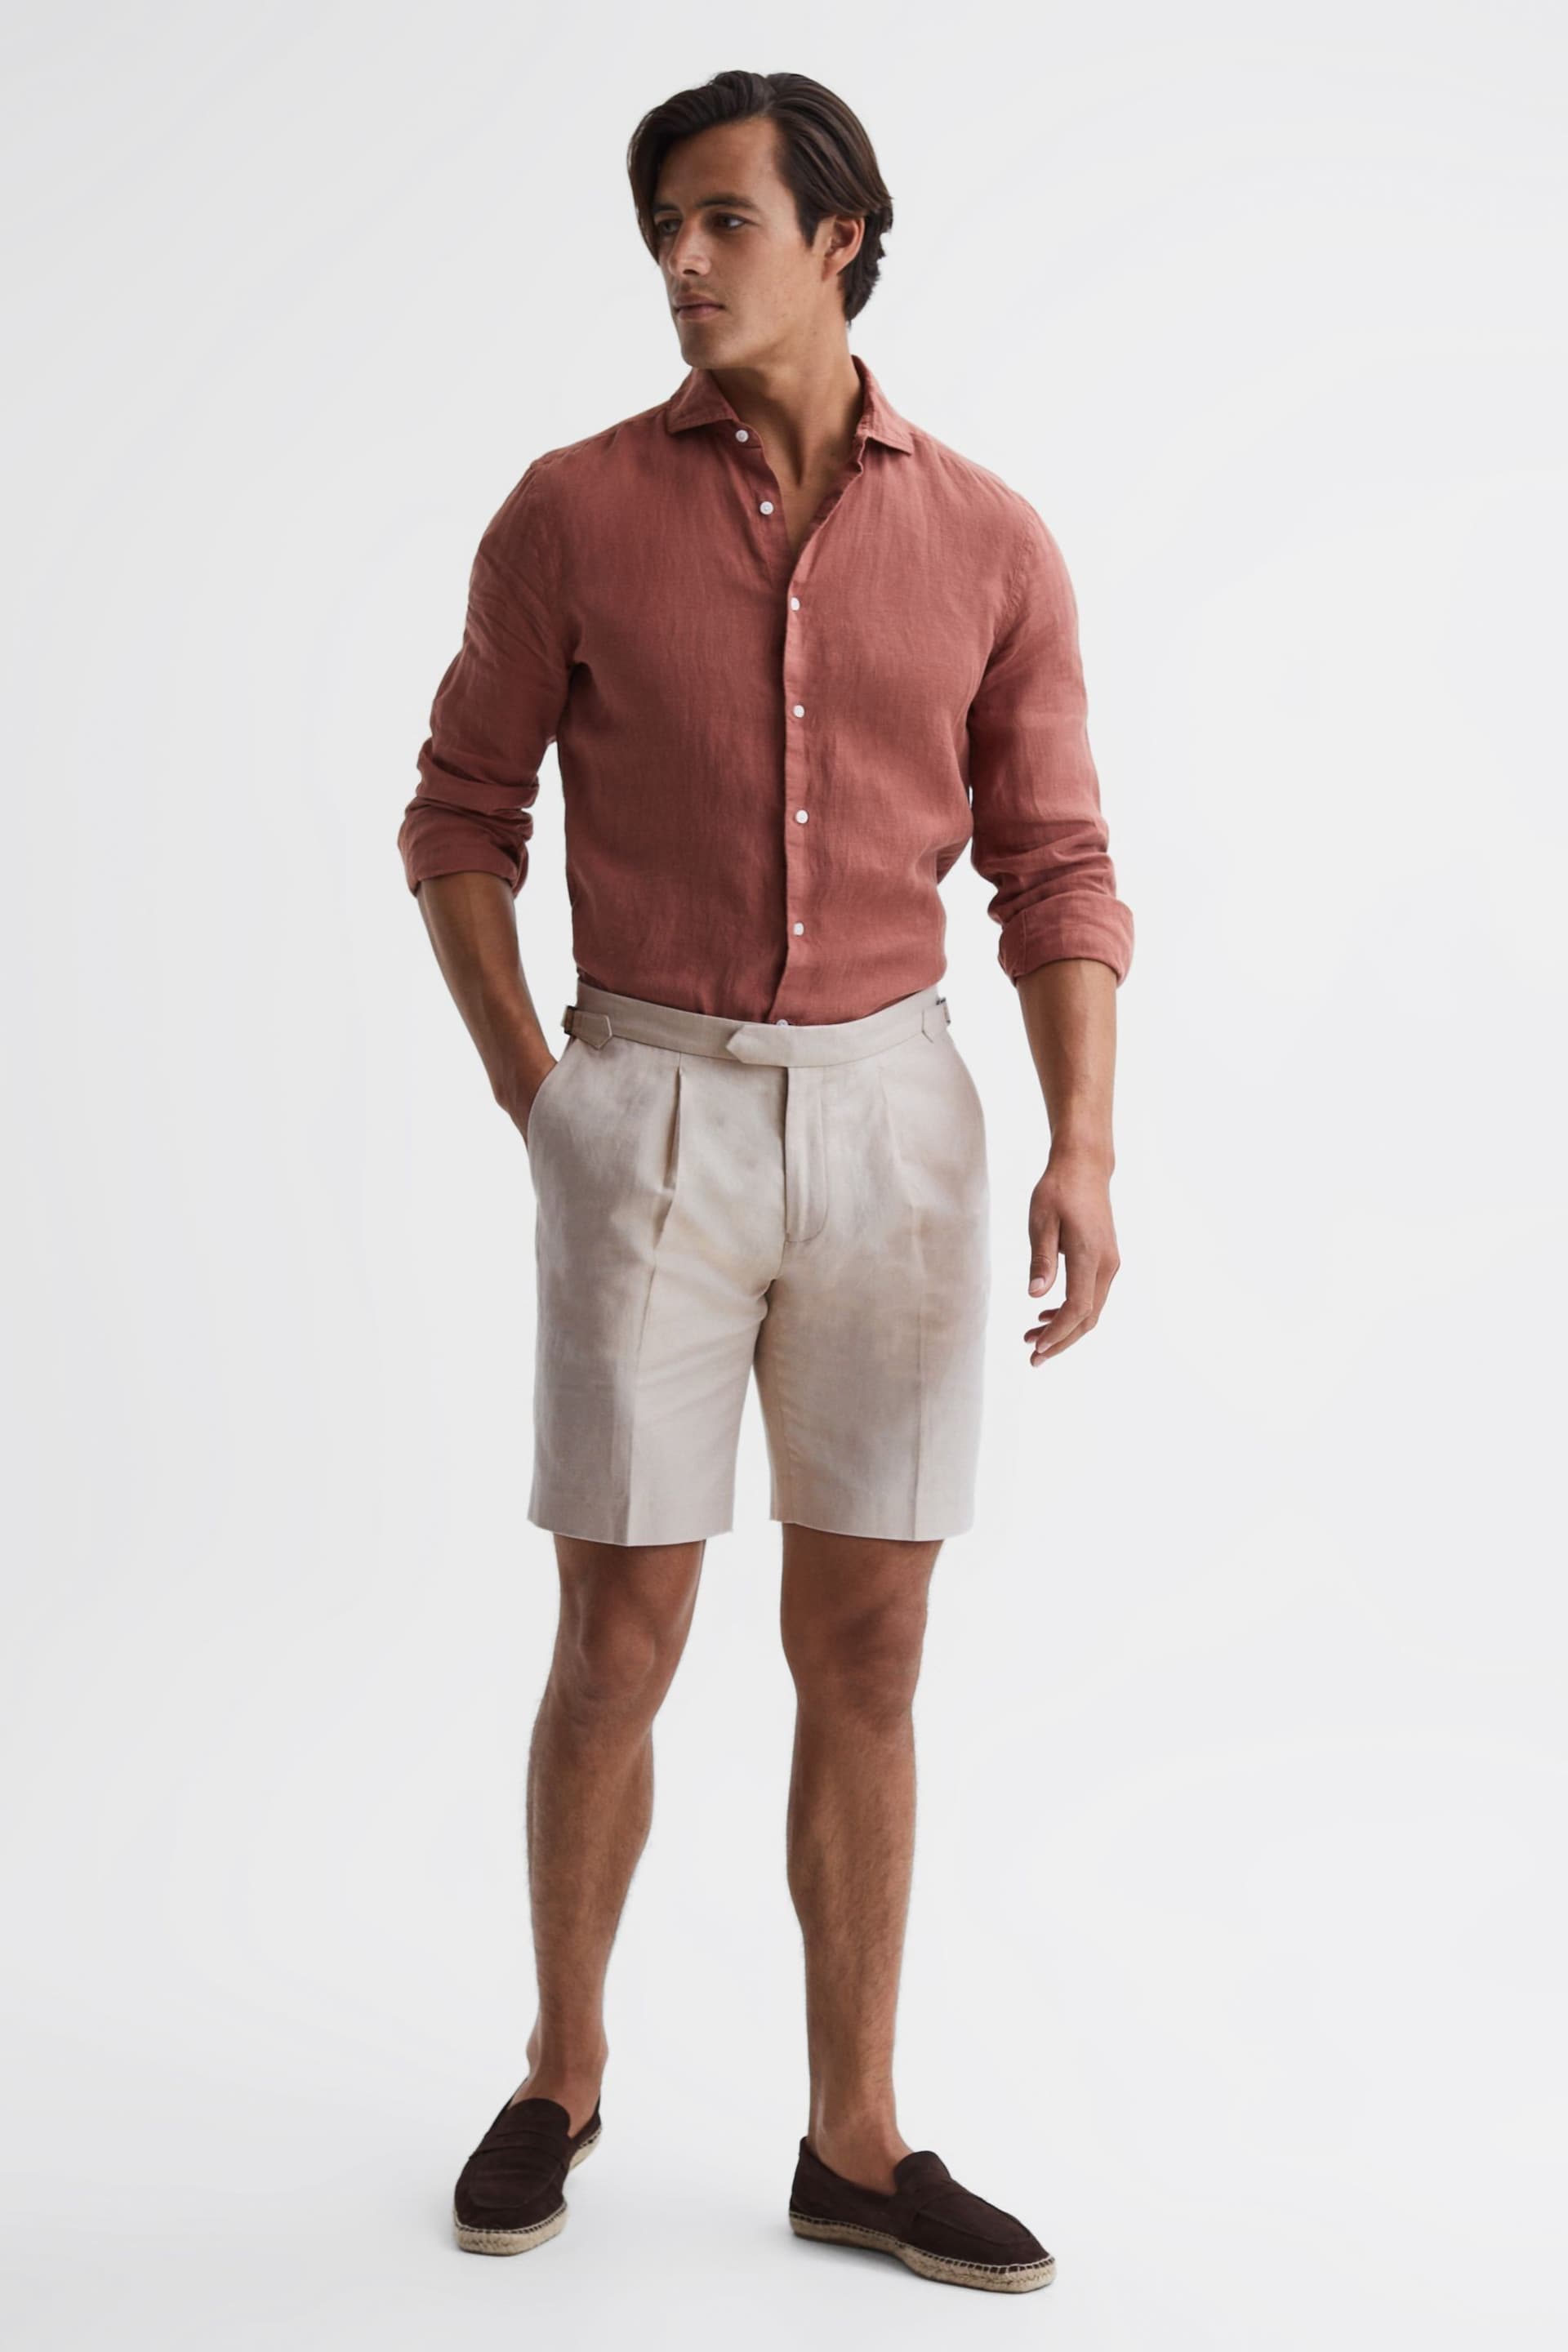 Reiss Stone Path Cotton-Linen Blend Chino Shorts - Image 1 of 6